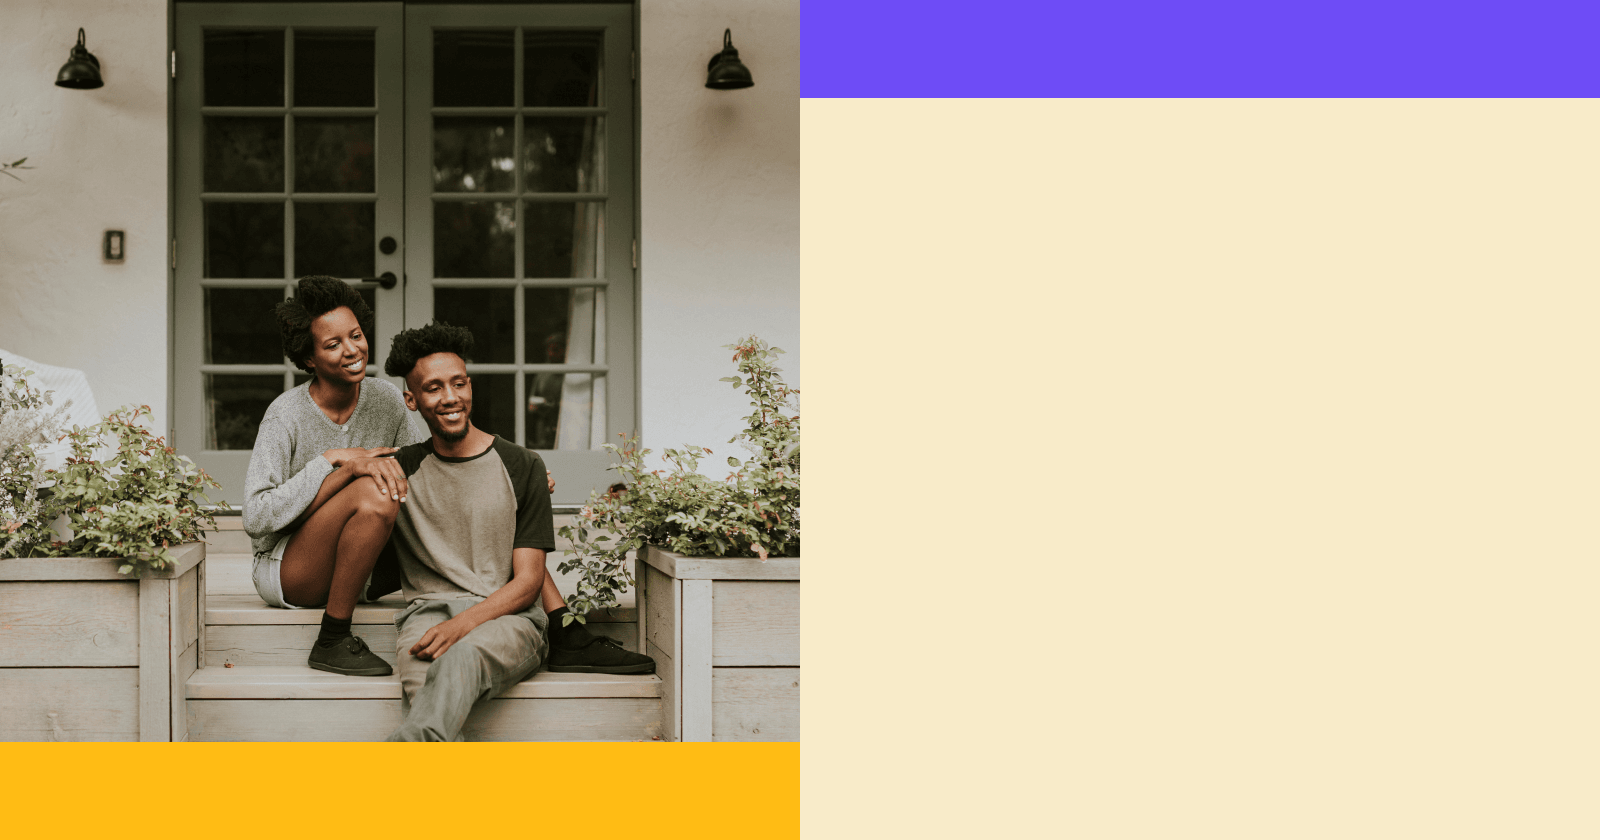 Image of Two Persons Sitting on Porch Steps and Abstract Blocks with Two Shades of Yellow and One Purple